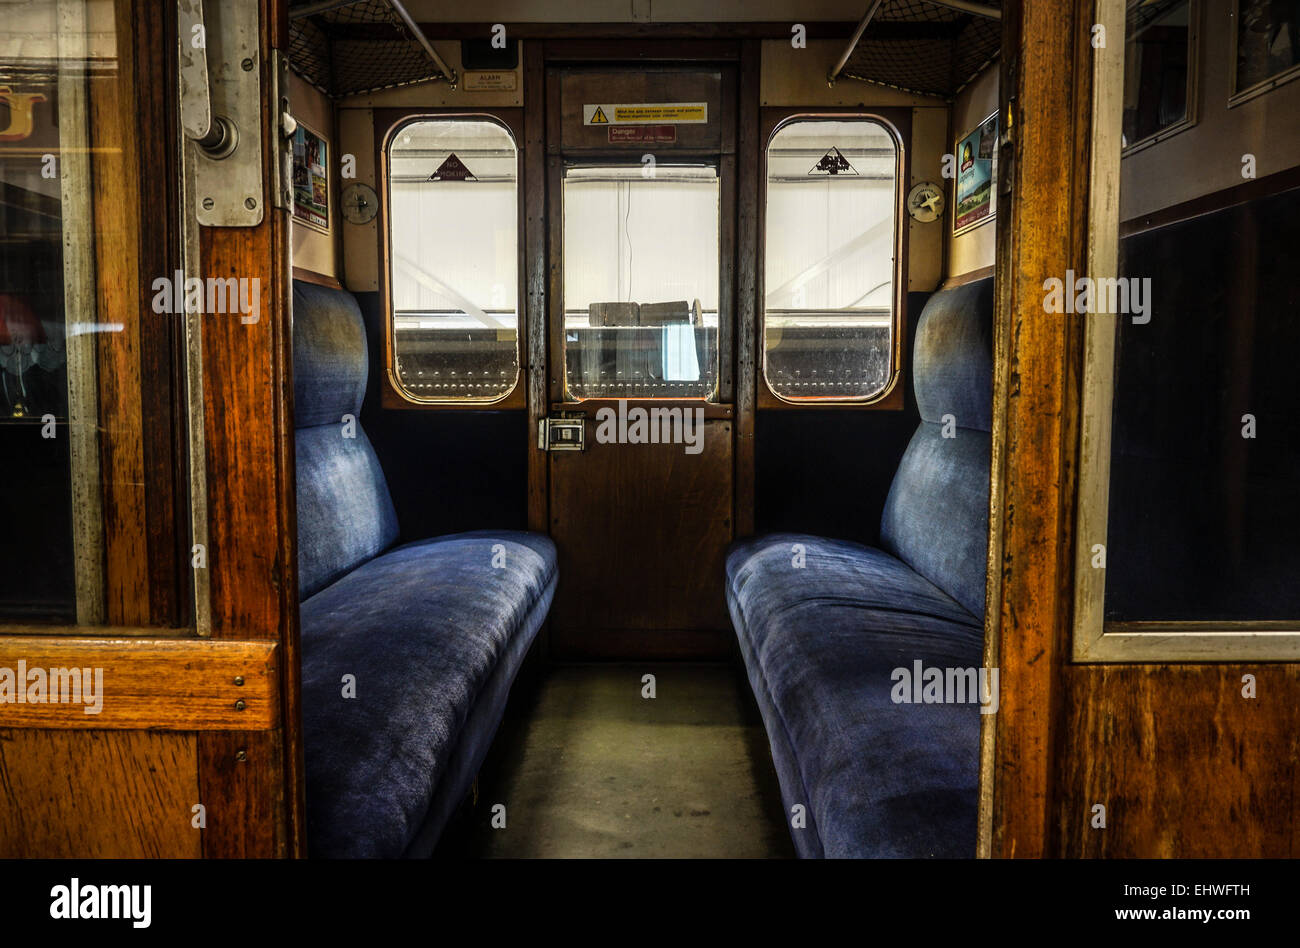 interior-view-of-a-compartment-inside-an-old-british-railway-carriage-EHWFTH.jpg